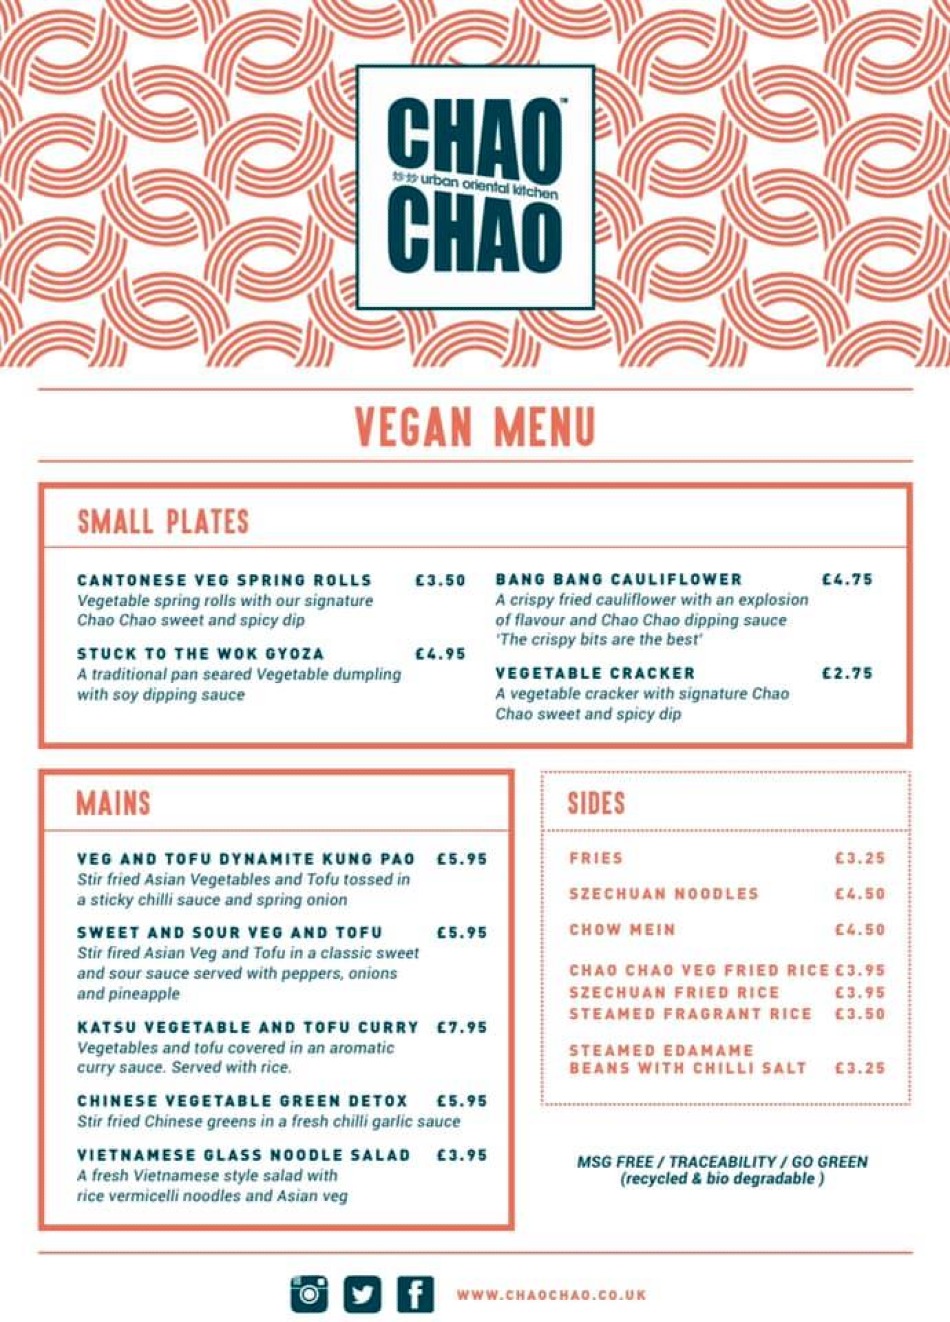 Takeaway Restaurant Menu Page - Chao Chao West Bridgford - Nottingham